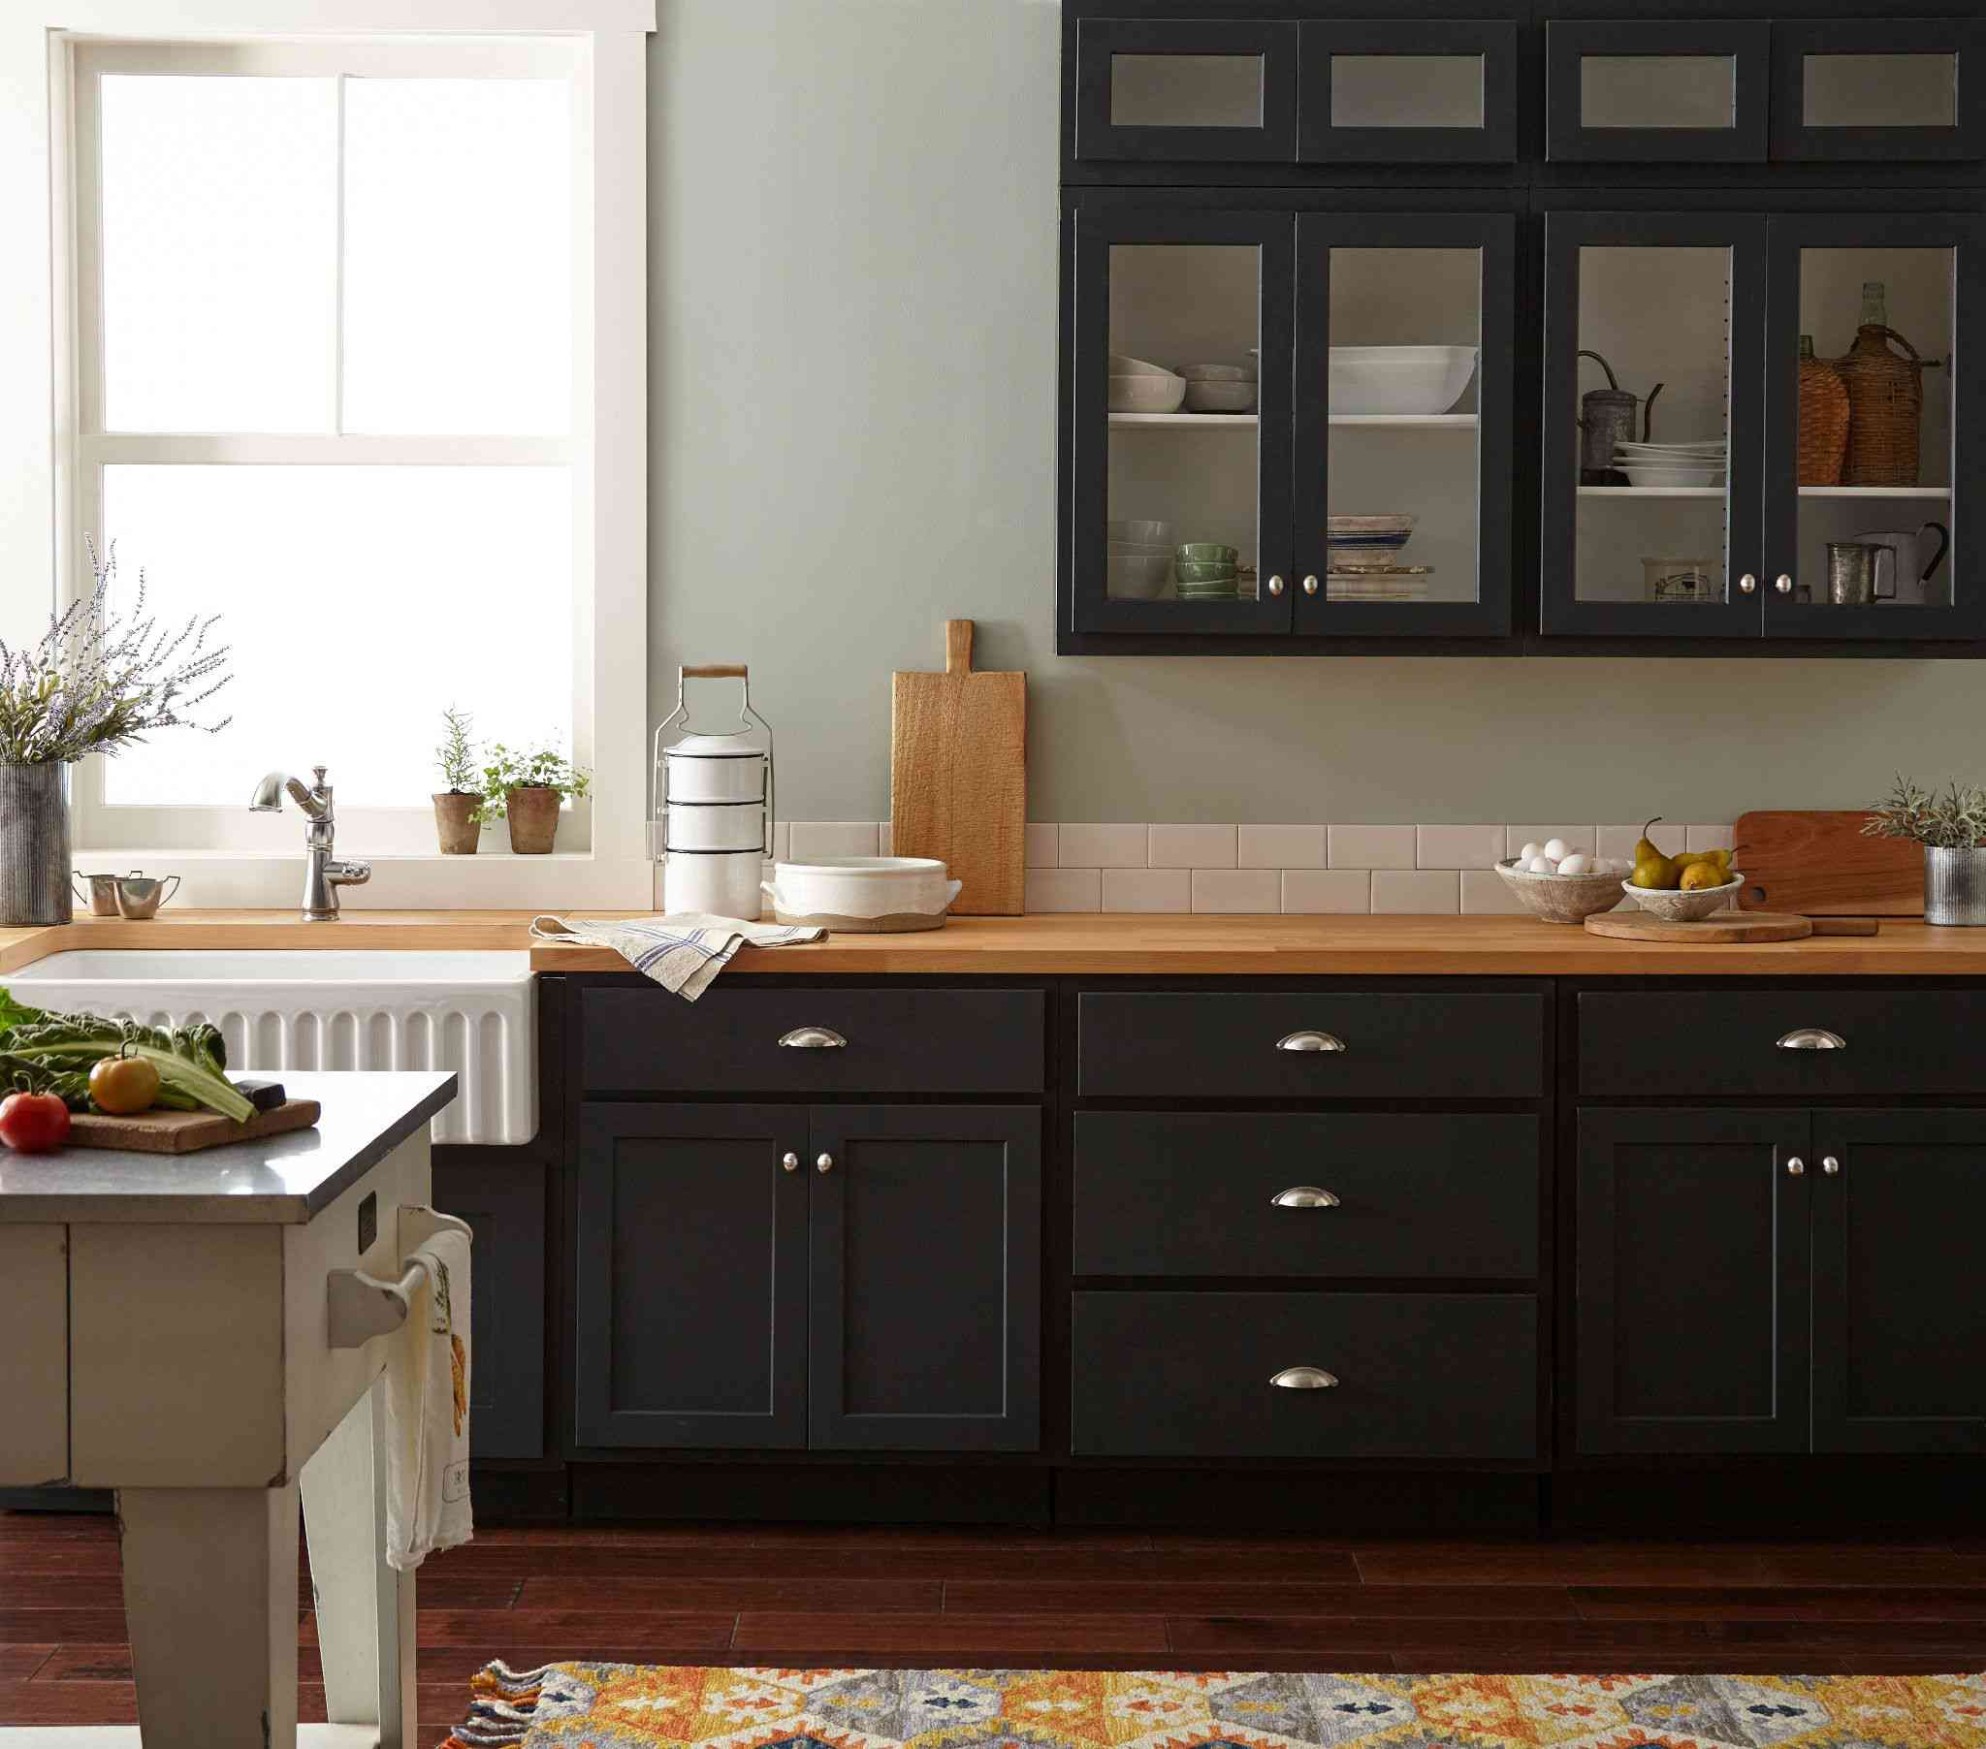 10 Best Kitchen Cabinet Paint Colors, According to Pros